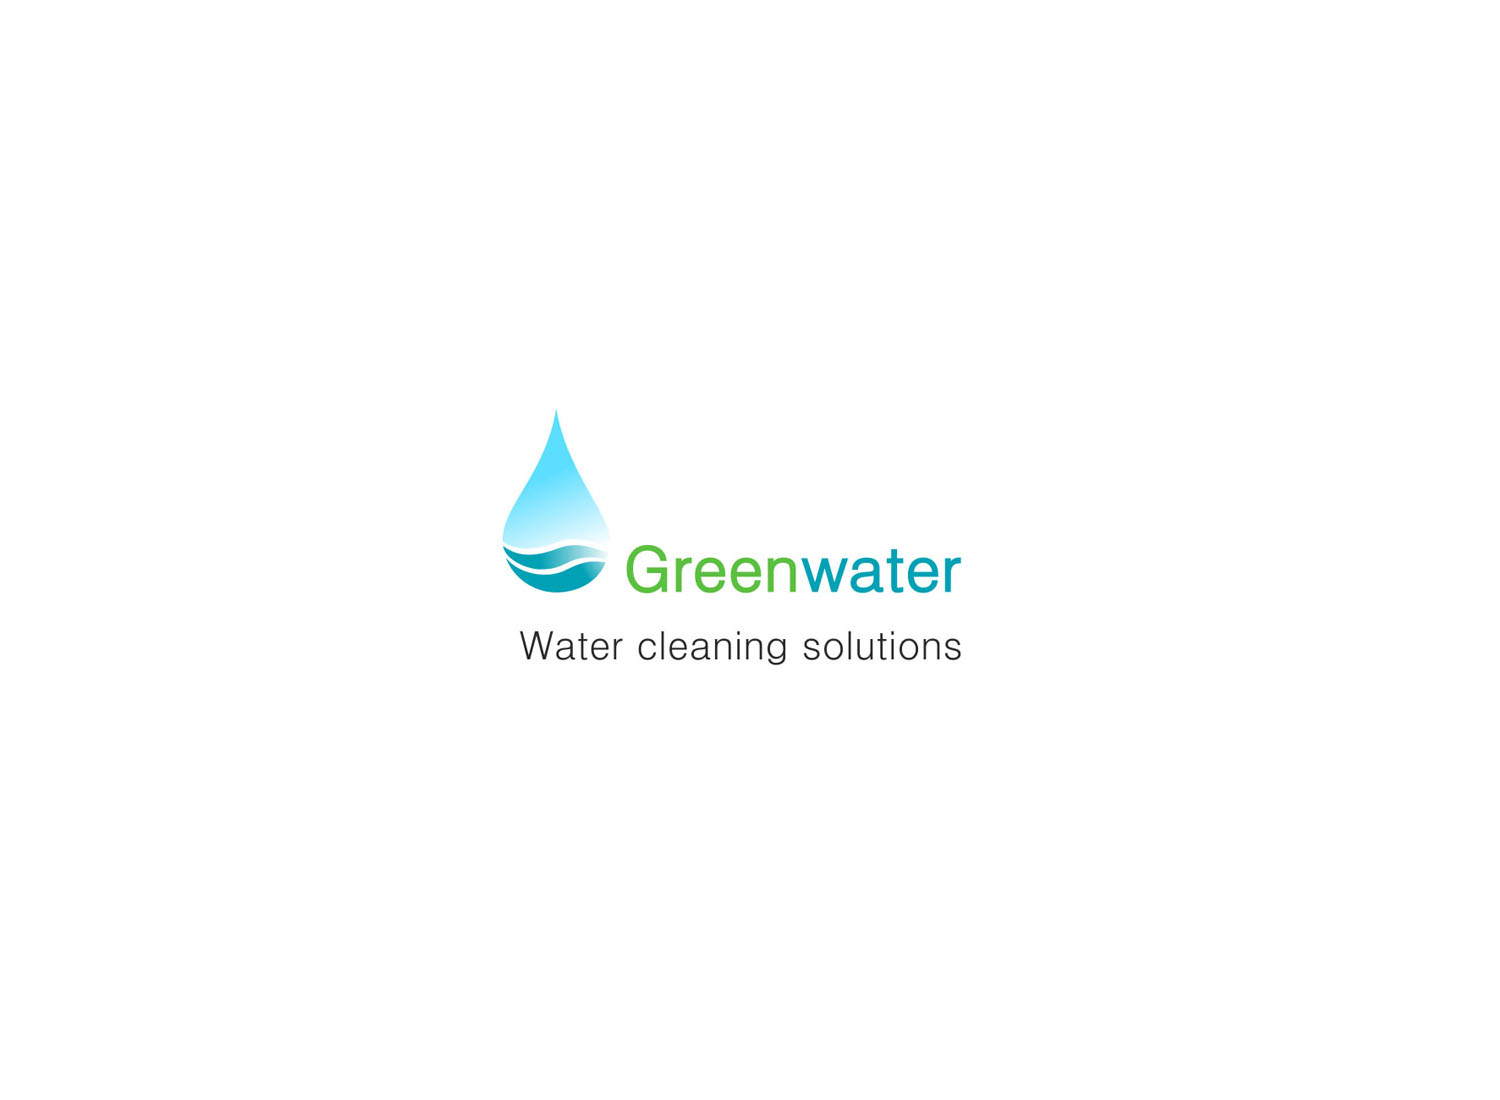 Logo-design-greenwater-by-lanagraphic